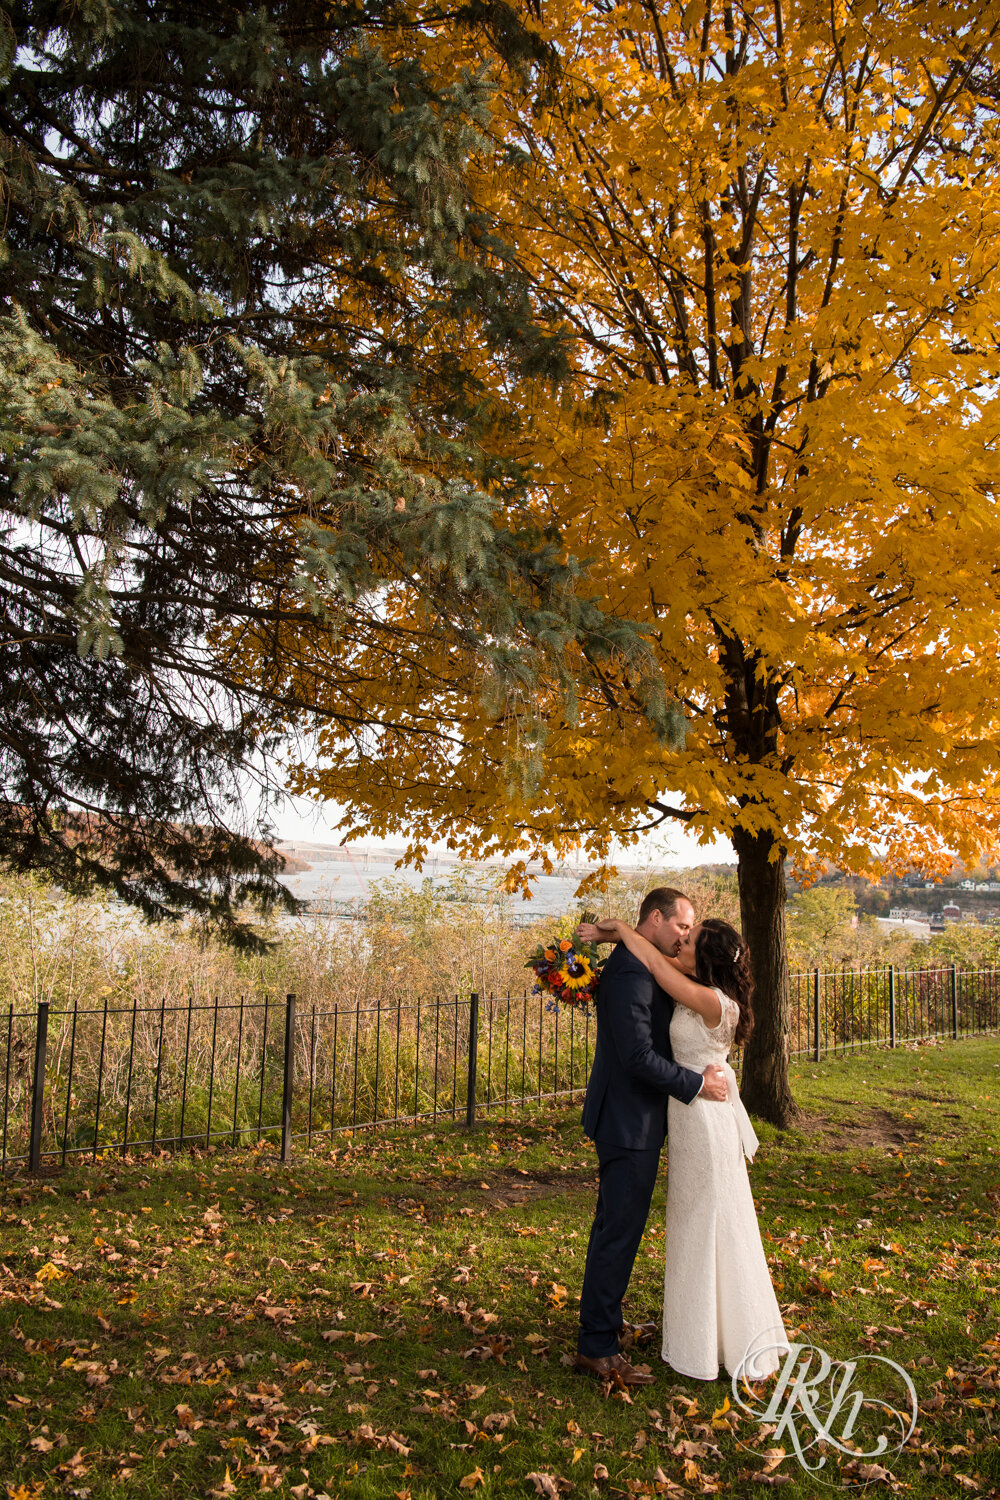 Bride and groom kiss in Pioneer Park in Stillwater, Minnesota at sunset.